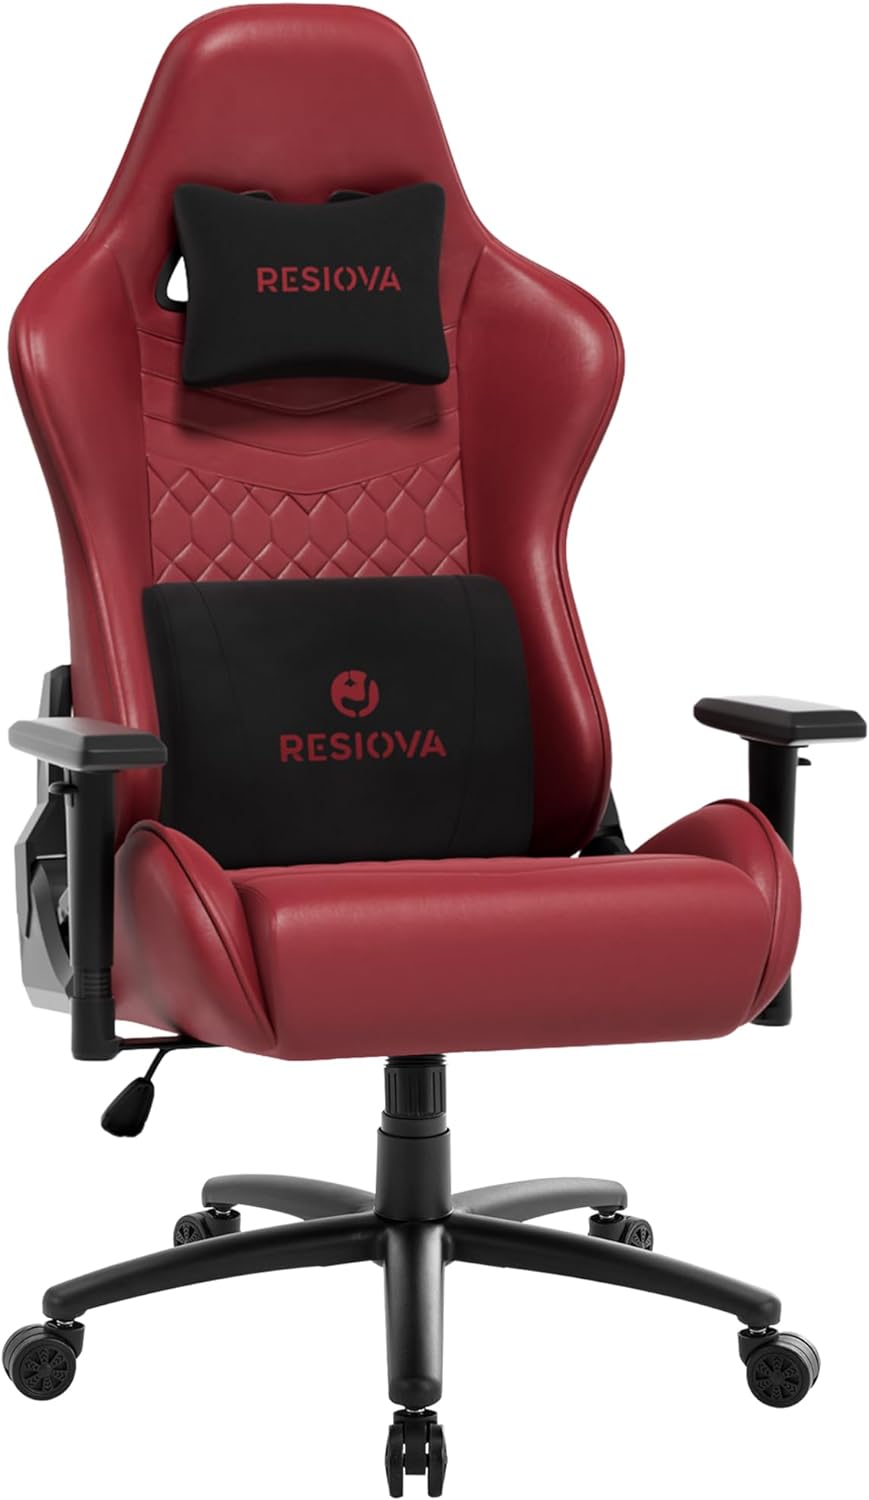 Gaming Chair for Adults,Ergonomic Office Computer Chair Racing Desk Chair,High Back Gamer Chair with Velvet Headrest and Lumbar Support,Pu Leather 350LBS Video Game Chair(Reds)